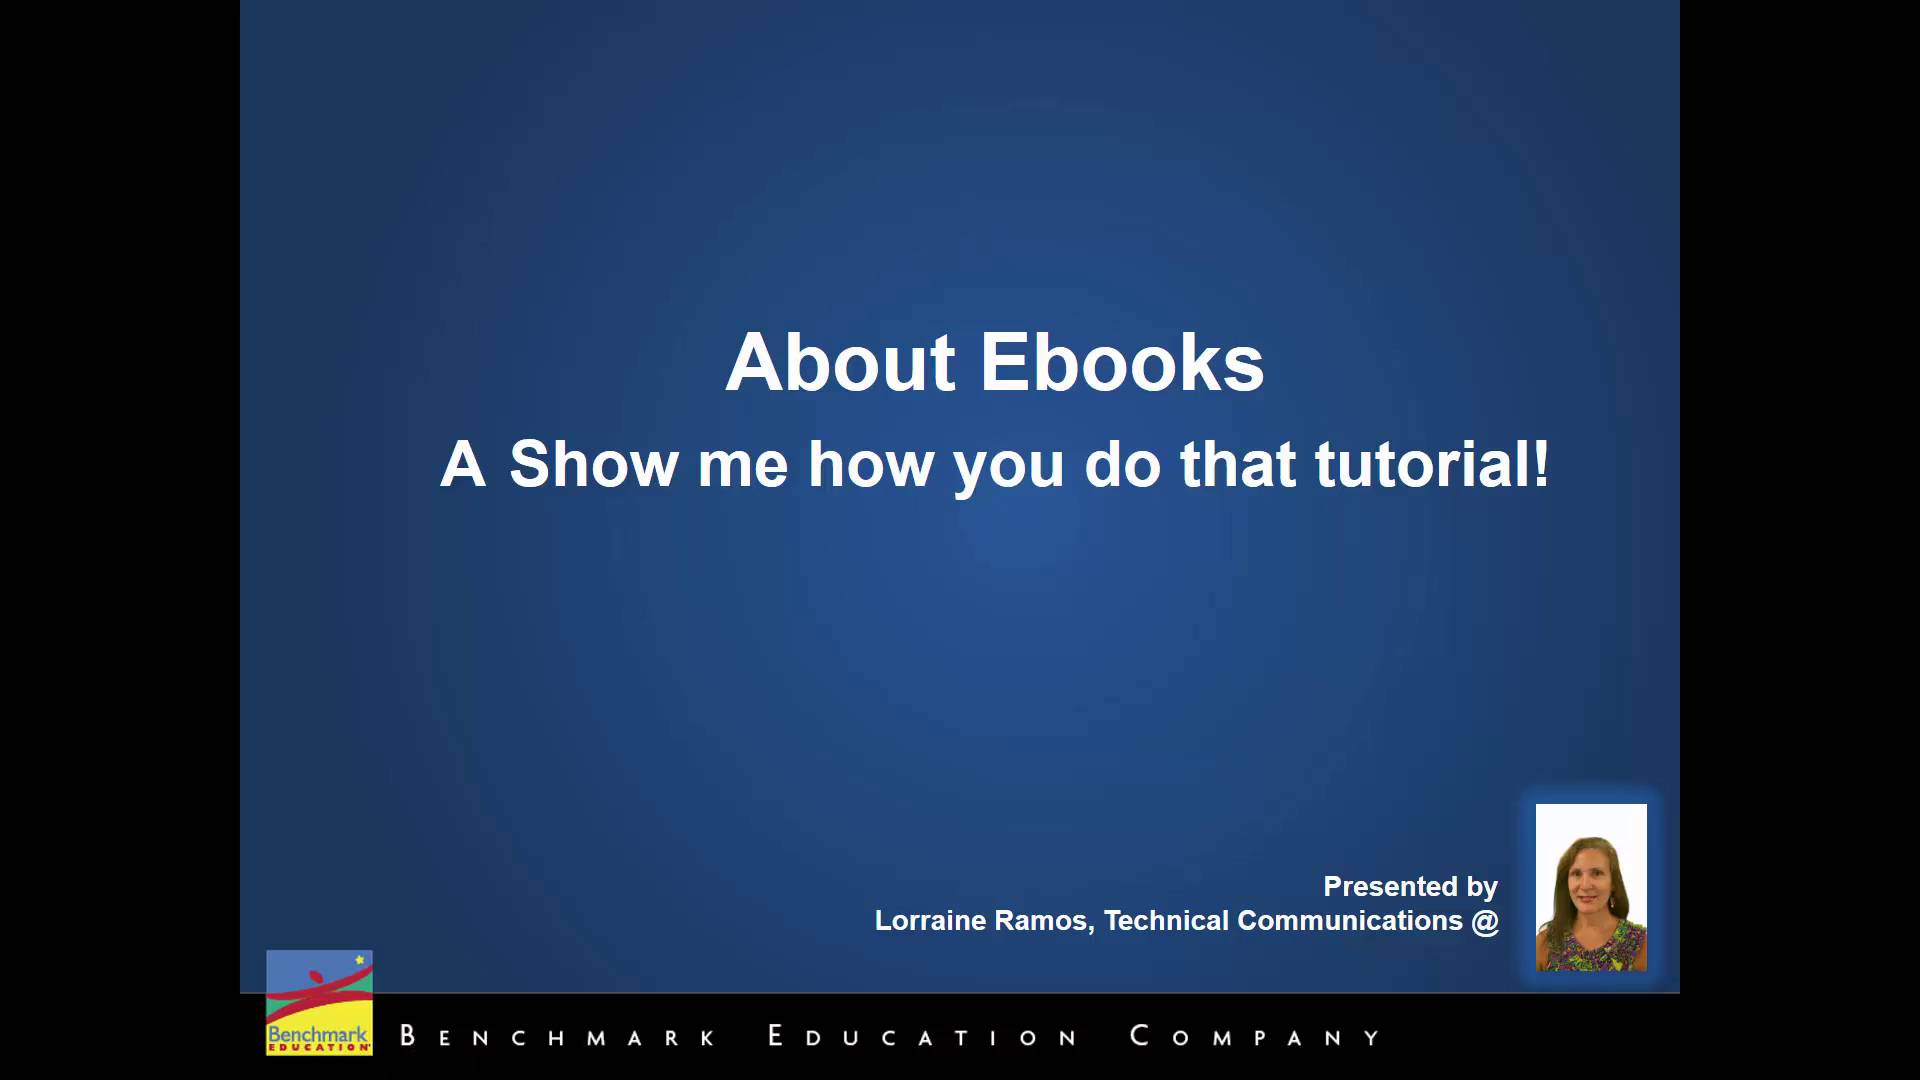 About eBooks